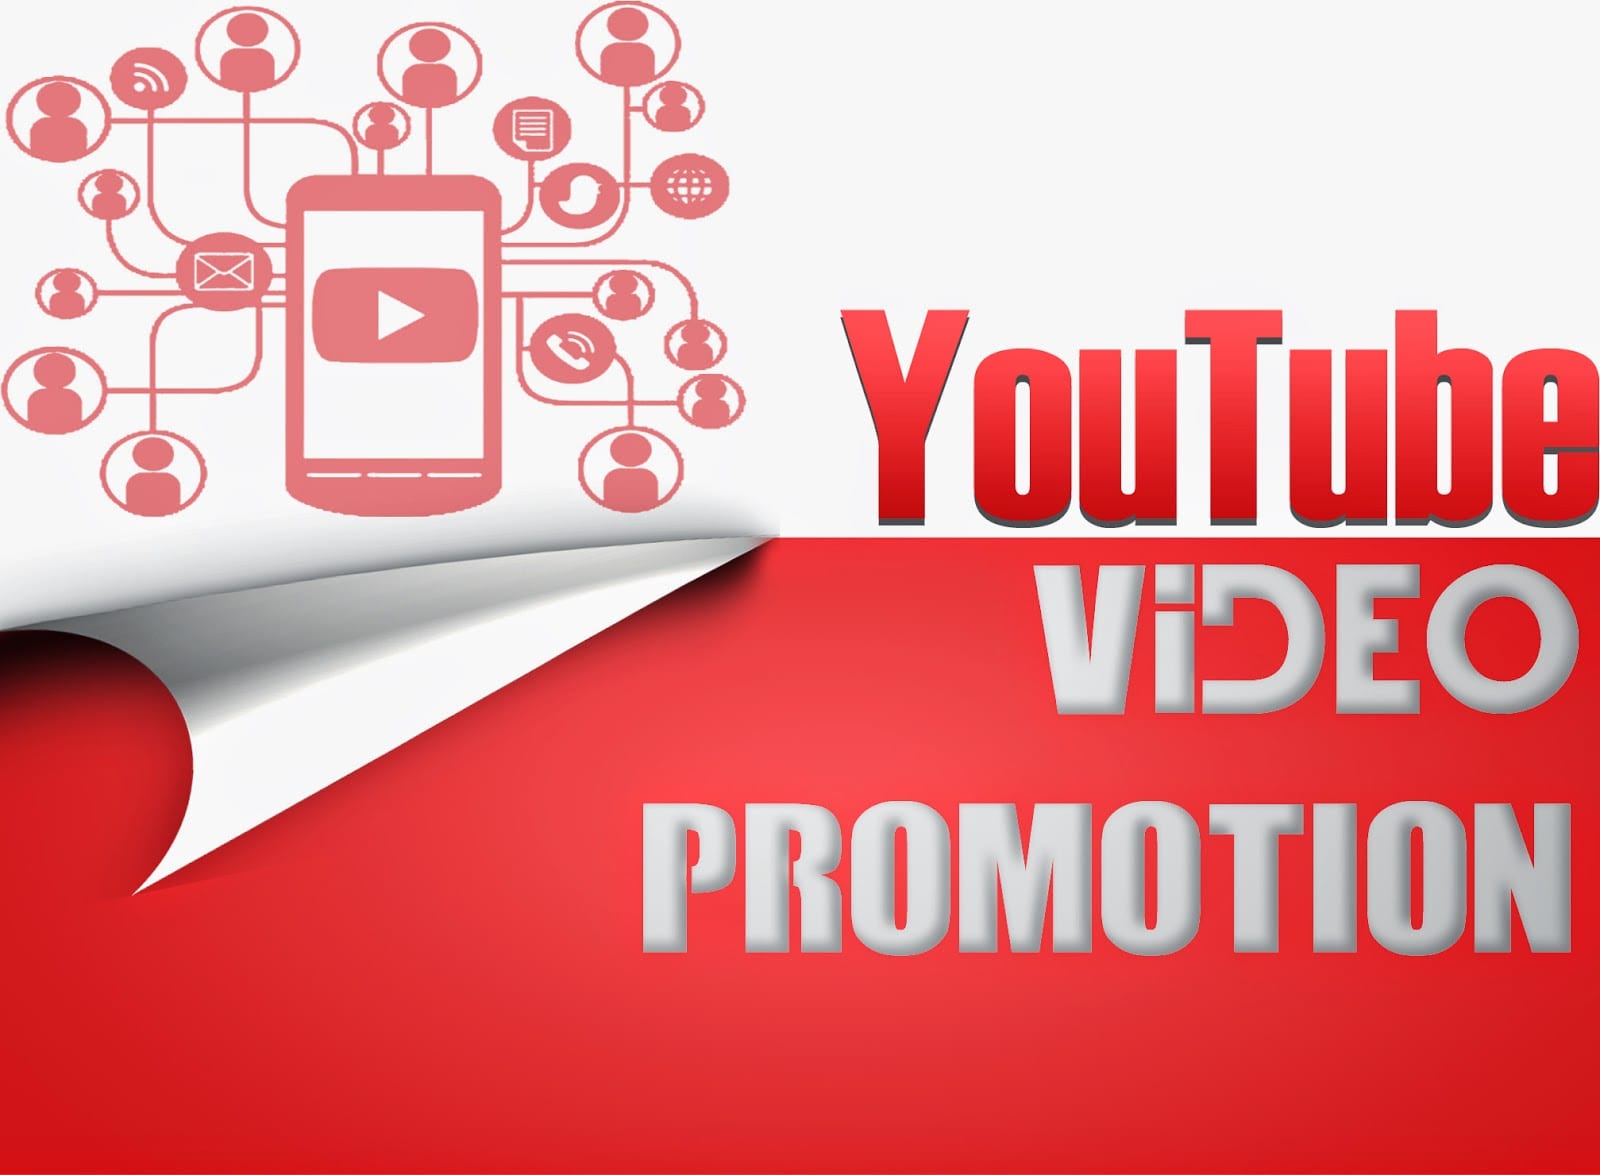 Advantages of YouTube Paid Promotion